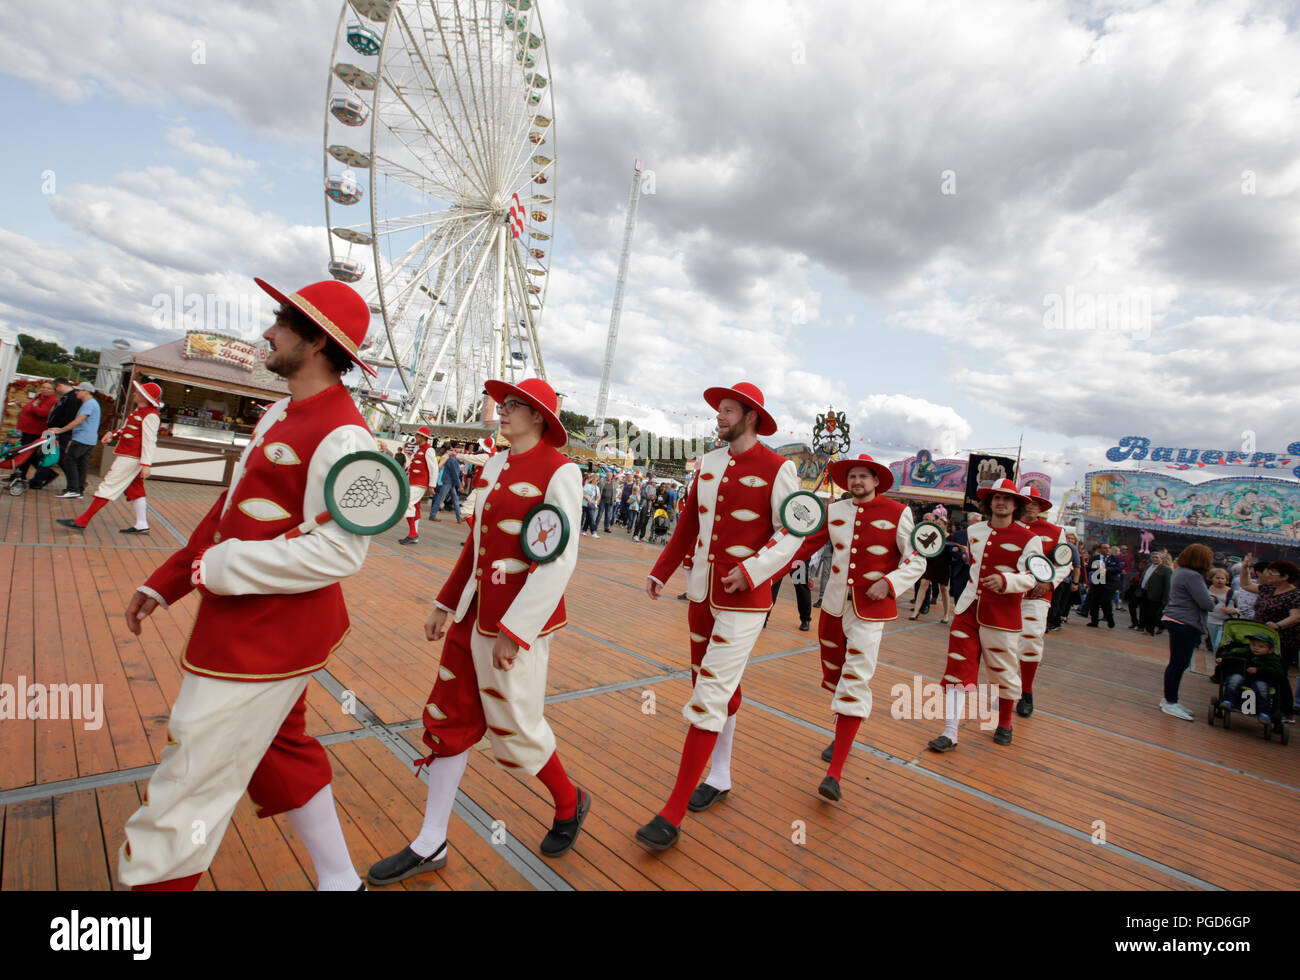 Worms, Germany. 25th August 2018. Journeymen march over the fairground. The largest wine and funfair along the Rhine, the Backfischfest started in Worms with the traditional handing over of power from the Lord Mayor to the mayor of the fishermen’s lea. Credit: Michael Debets/Alamy Live News Stock Photo